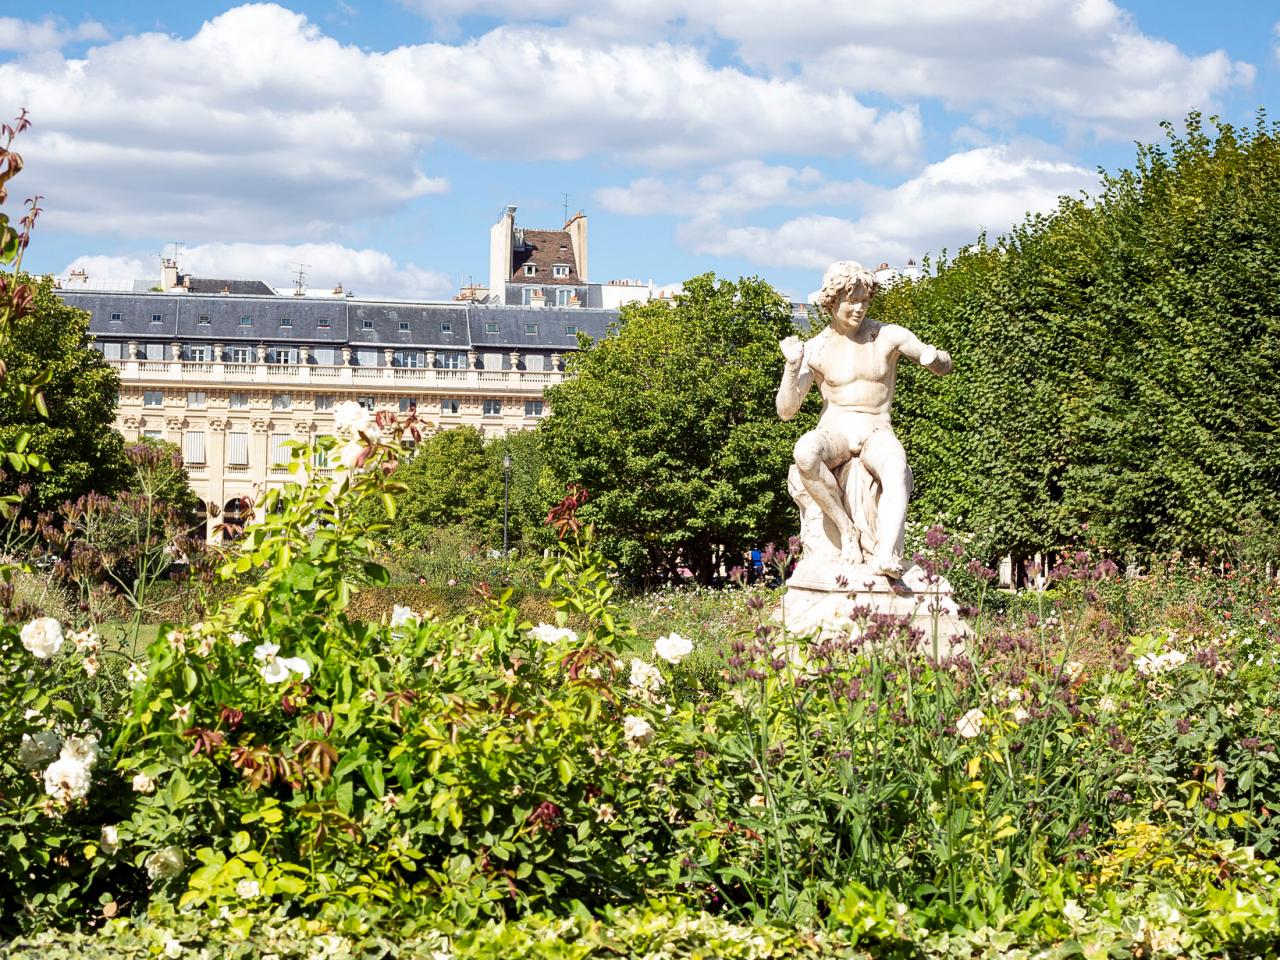 How to Spend a Weekend in Paris Like a Local | Paris Vacation Destinations, Ideas and Guides